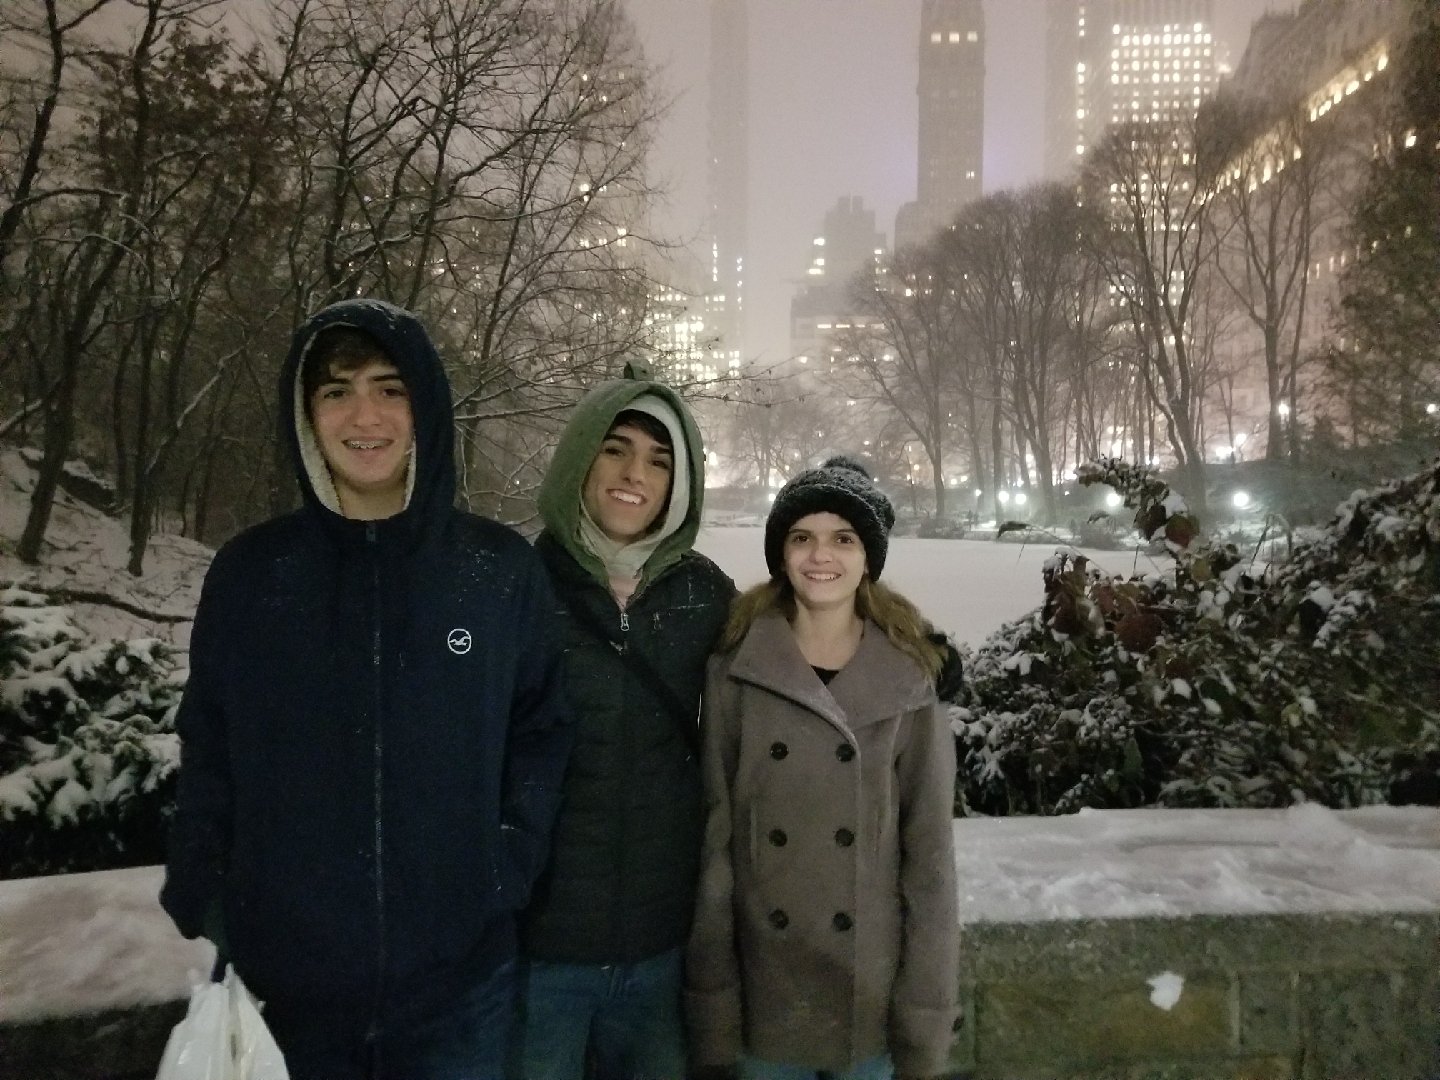 three teens posing for a picture in Central Park New York City while it snows